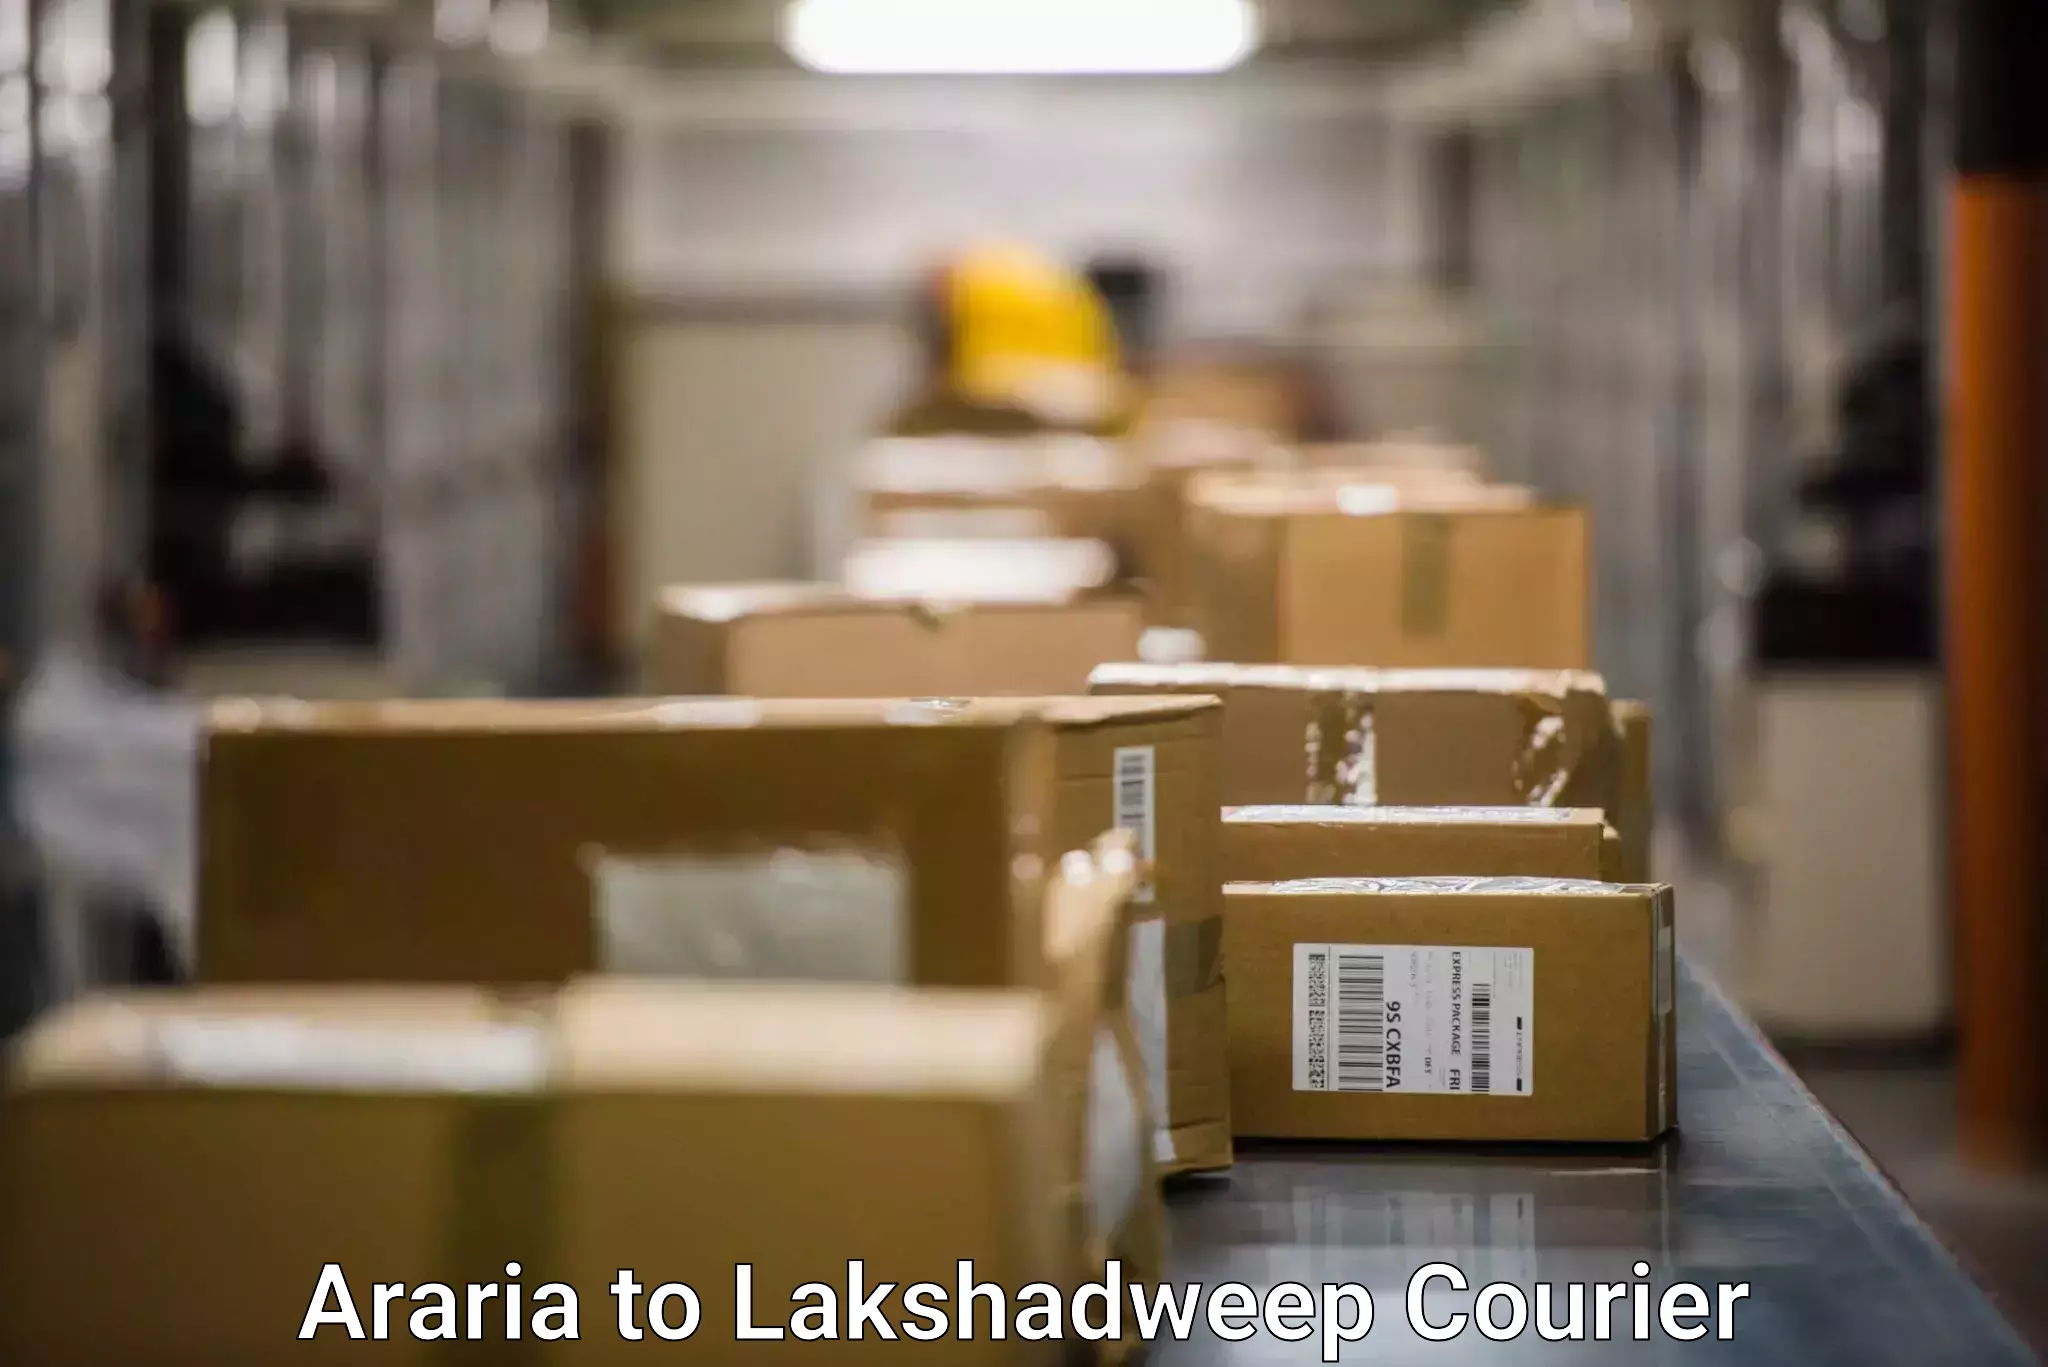 State-of-the-art courier technology Araria to Lakshadweep